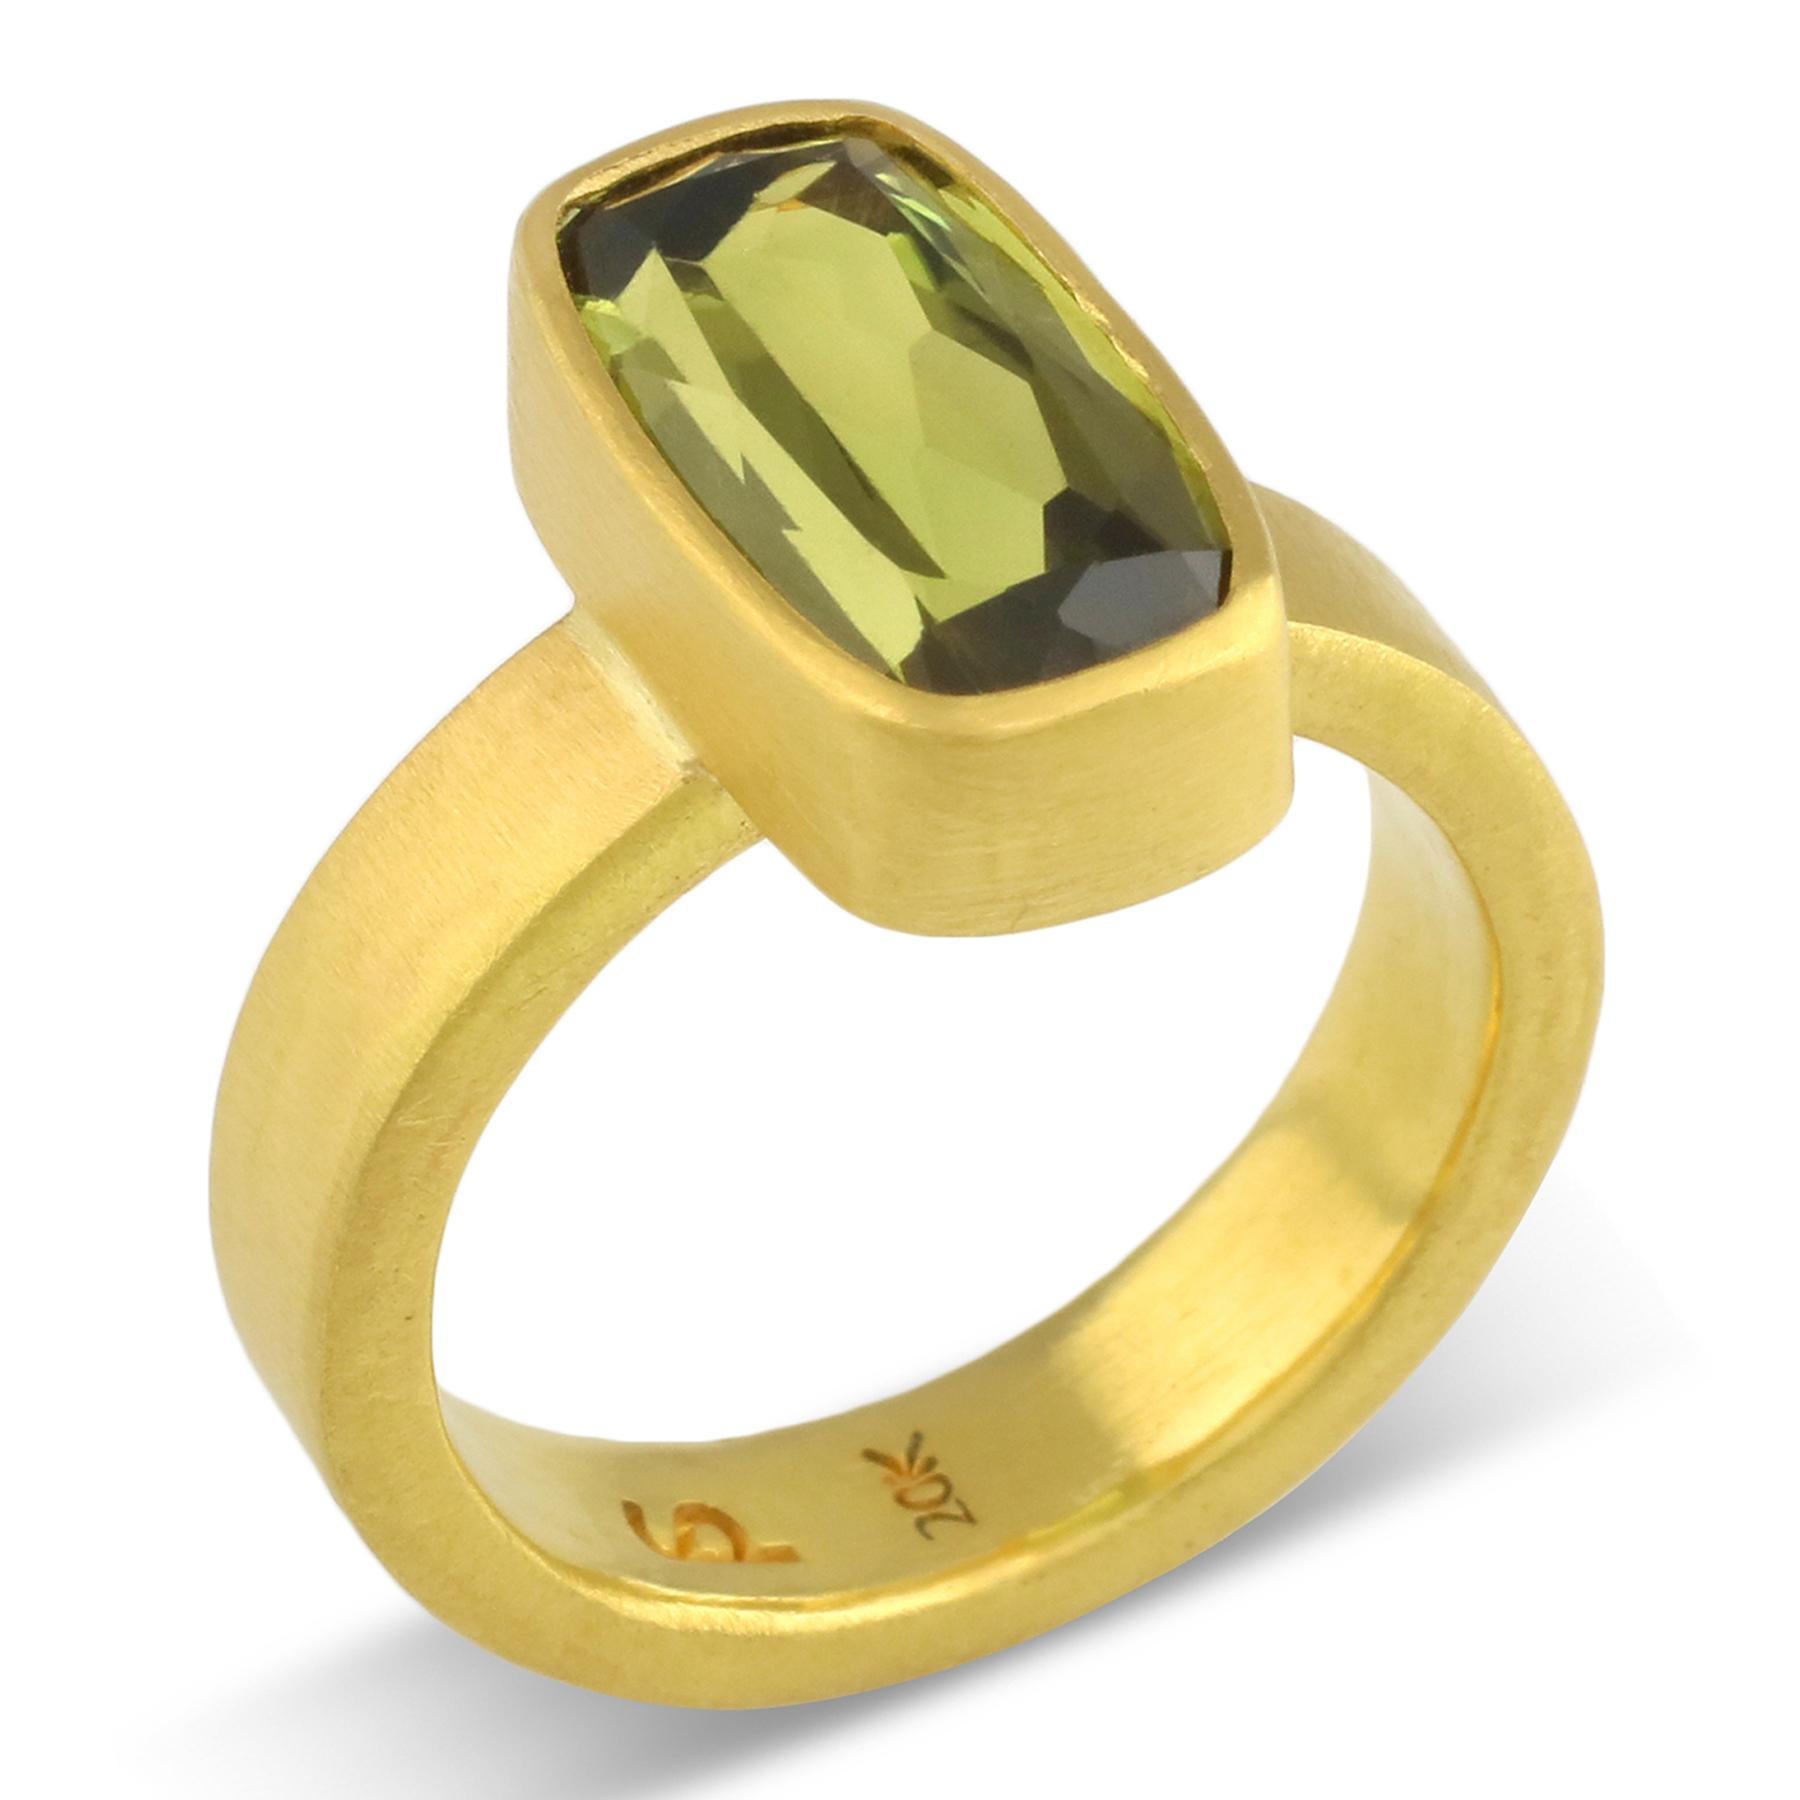 Artisan PHILIPPE SPENCER 5.17 Ct. Olive Tourmaline in 22K and 20K Gold Statement Ring For Sale